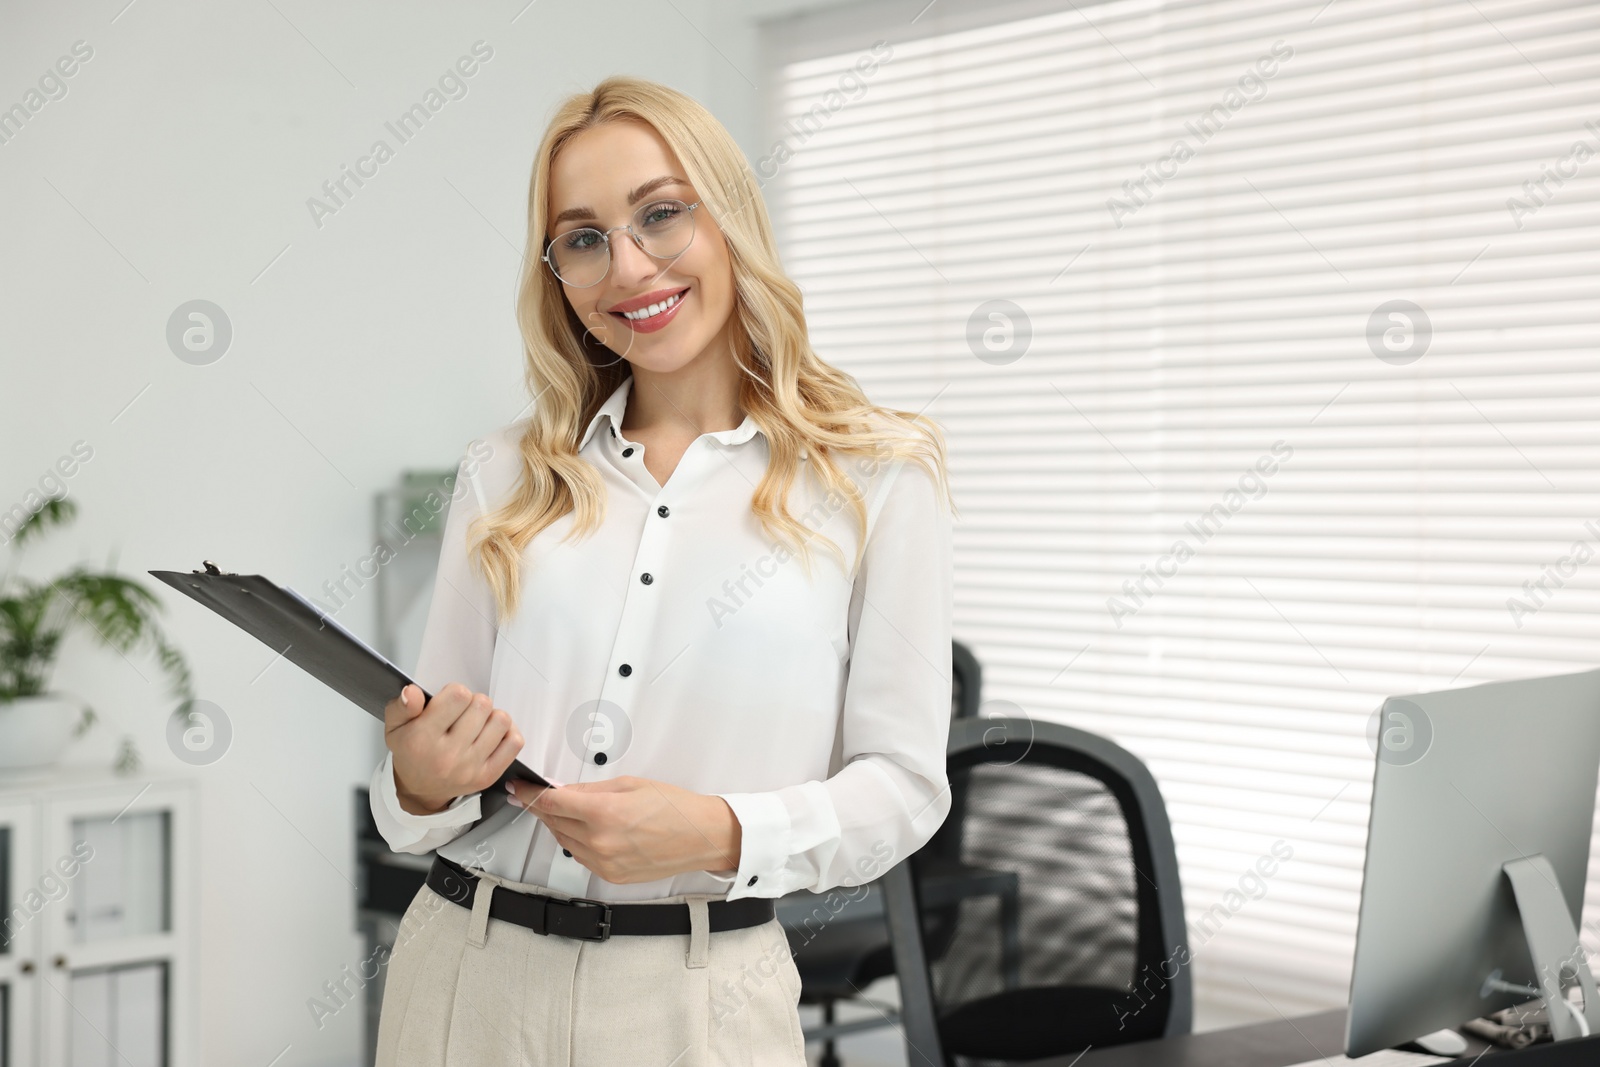 Photo of Happy secretary with glasses and clipboard in office, space for text